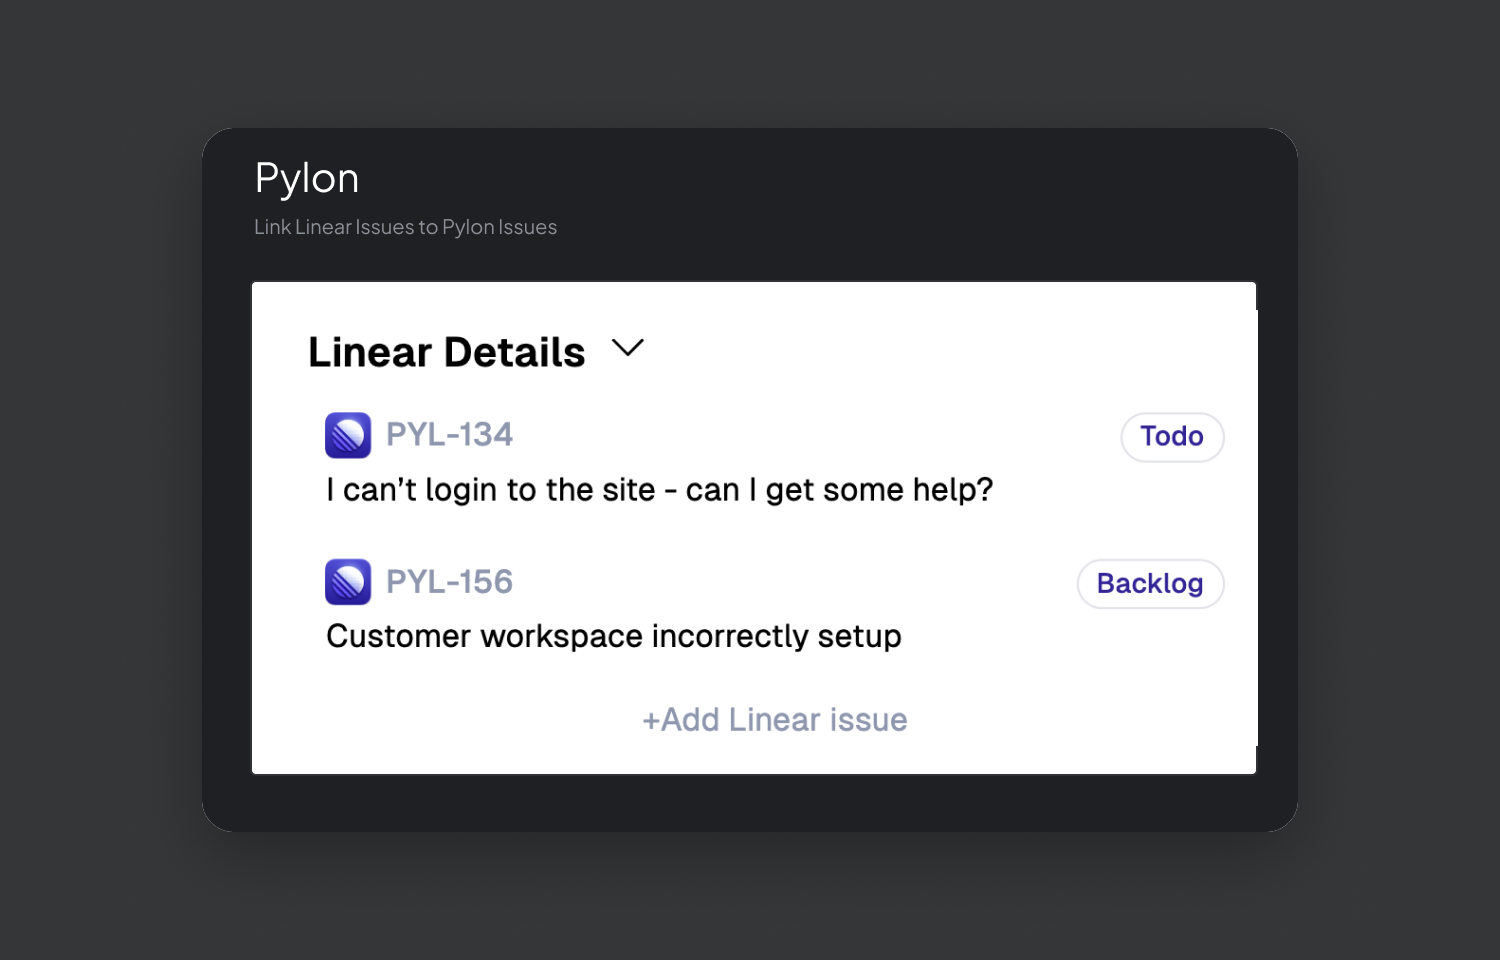 Link Linear issues to Pylon